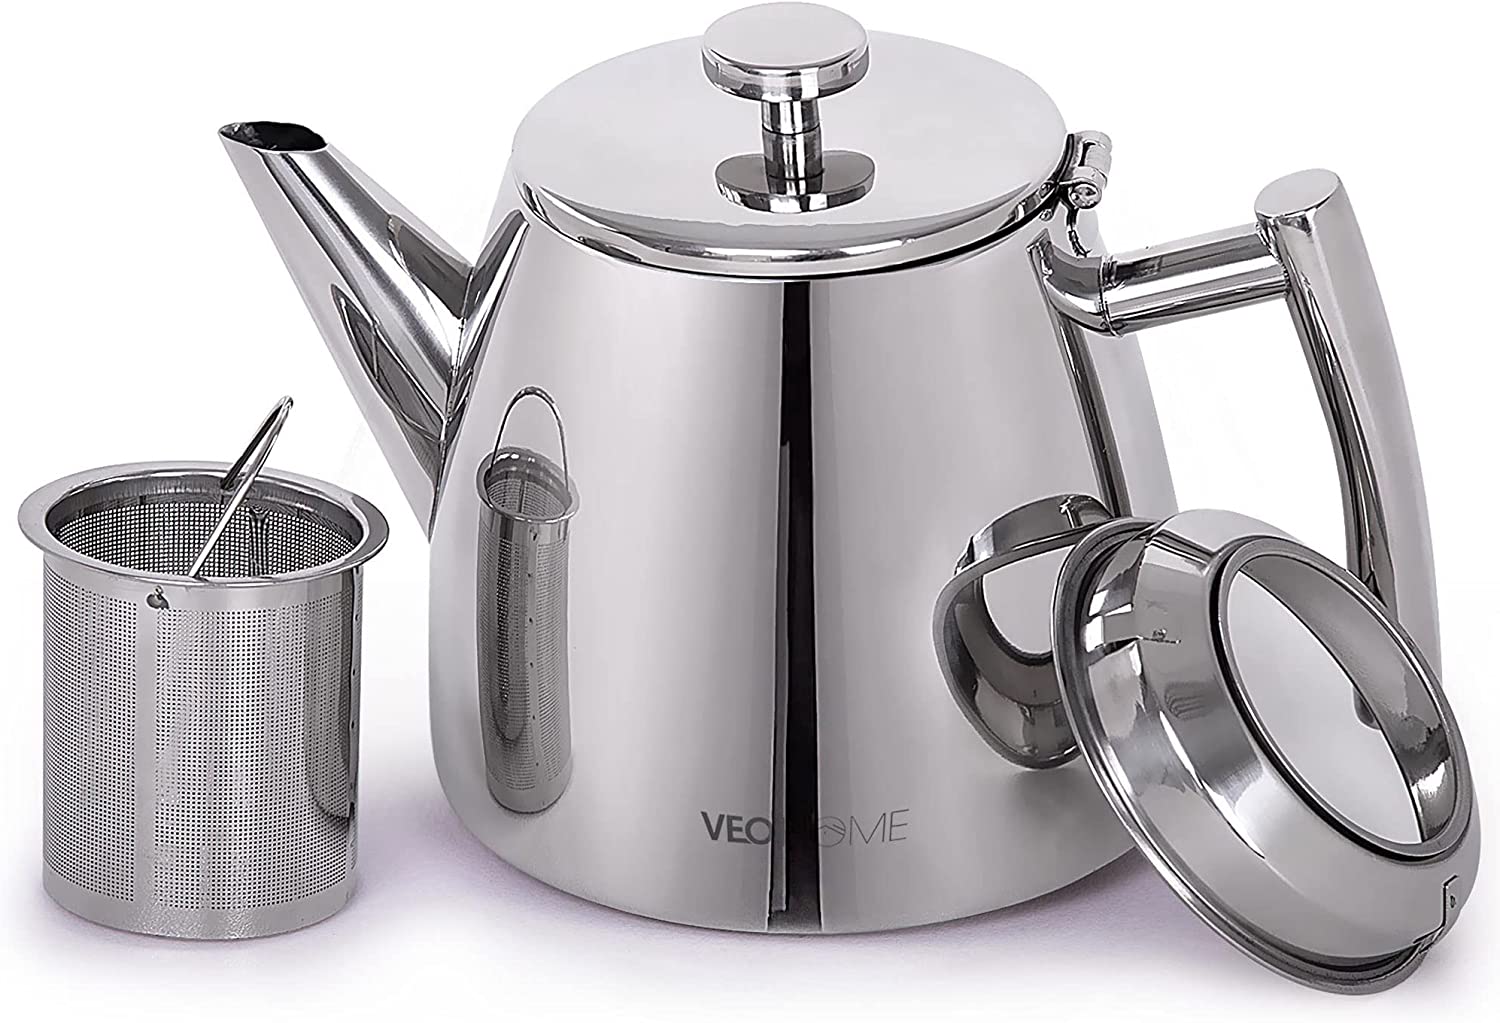 VeoHome Teapot made of stainless steel (1L) - with tea infuser for loose tea - double-walled insulation keeps tea warm for longer - durable, scratch-resistant, chic design for the stylish modern kitchen (1L)